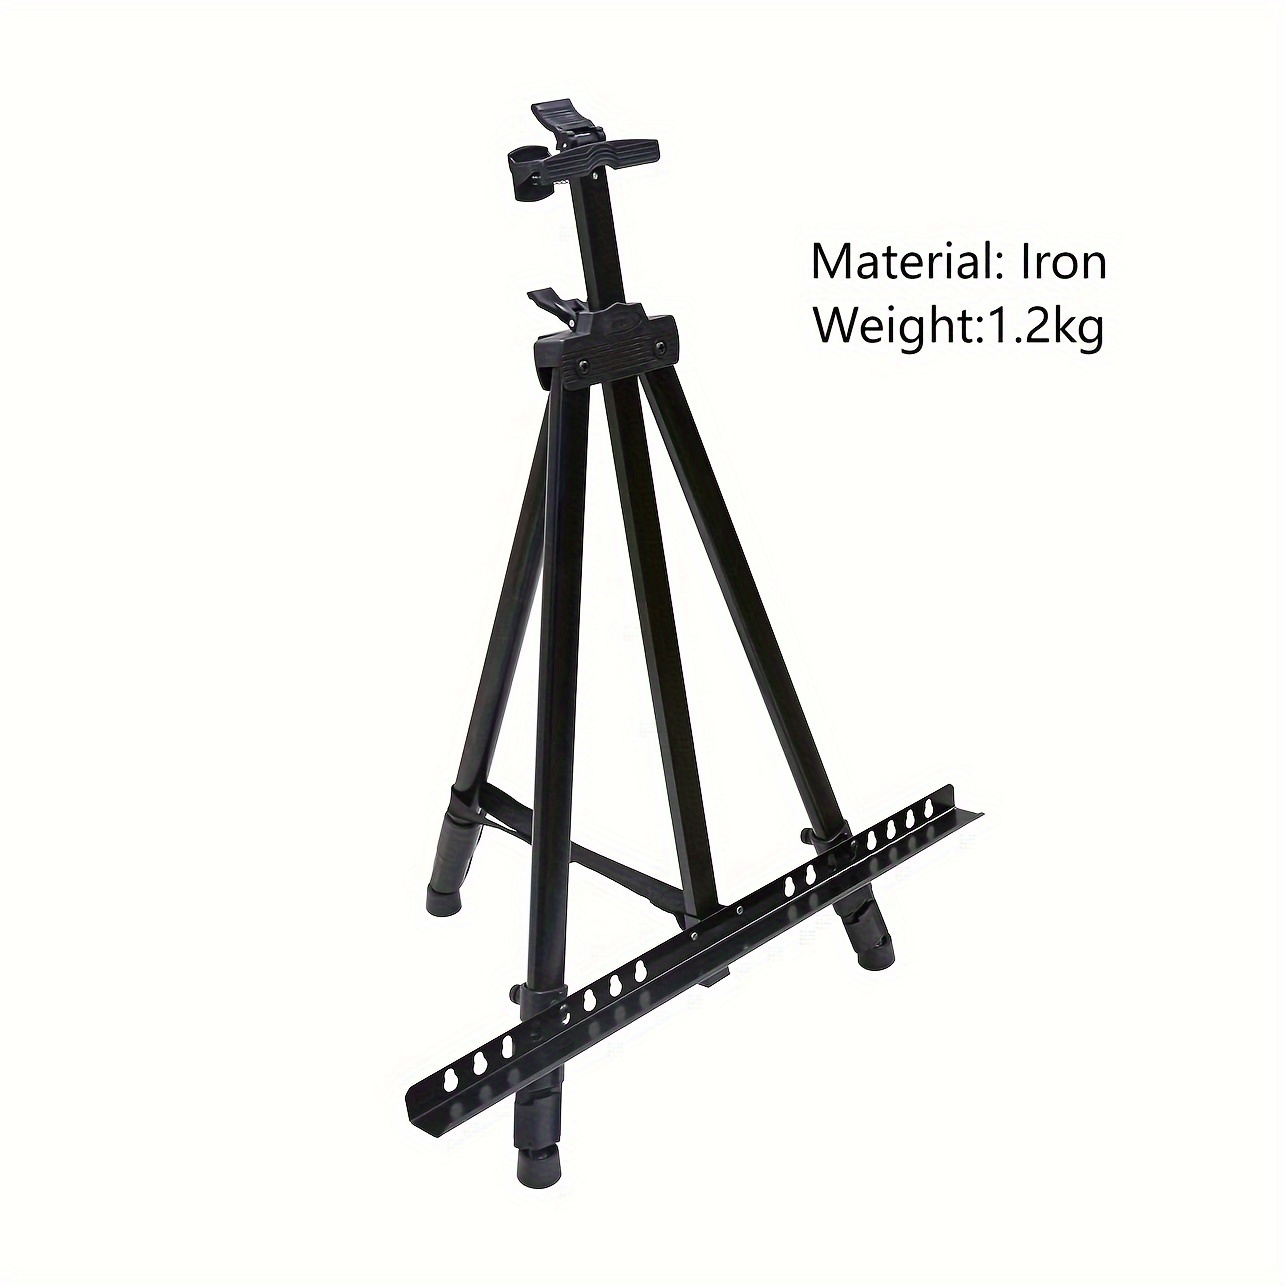 Artists Portable Lightweight Metal Display Easel Stand for Painting Stand  for Artist Stand Canvas Stand for Painting Drawing Stand Adjustable Height  Tripod Easel Stand for Painting Board Holder Free Weatherproof Carry Bag.